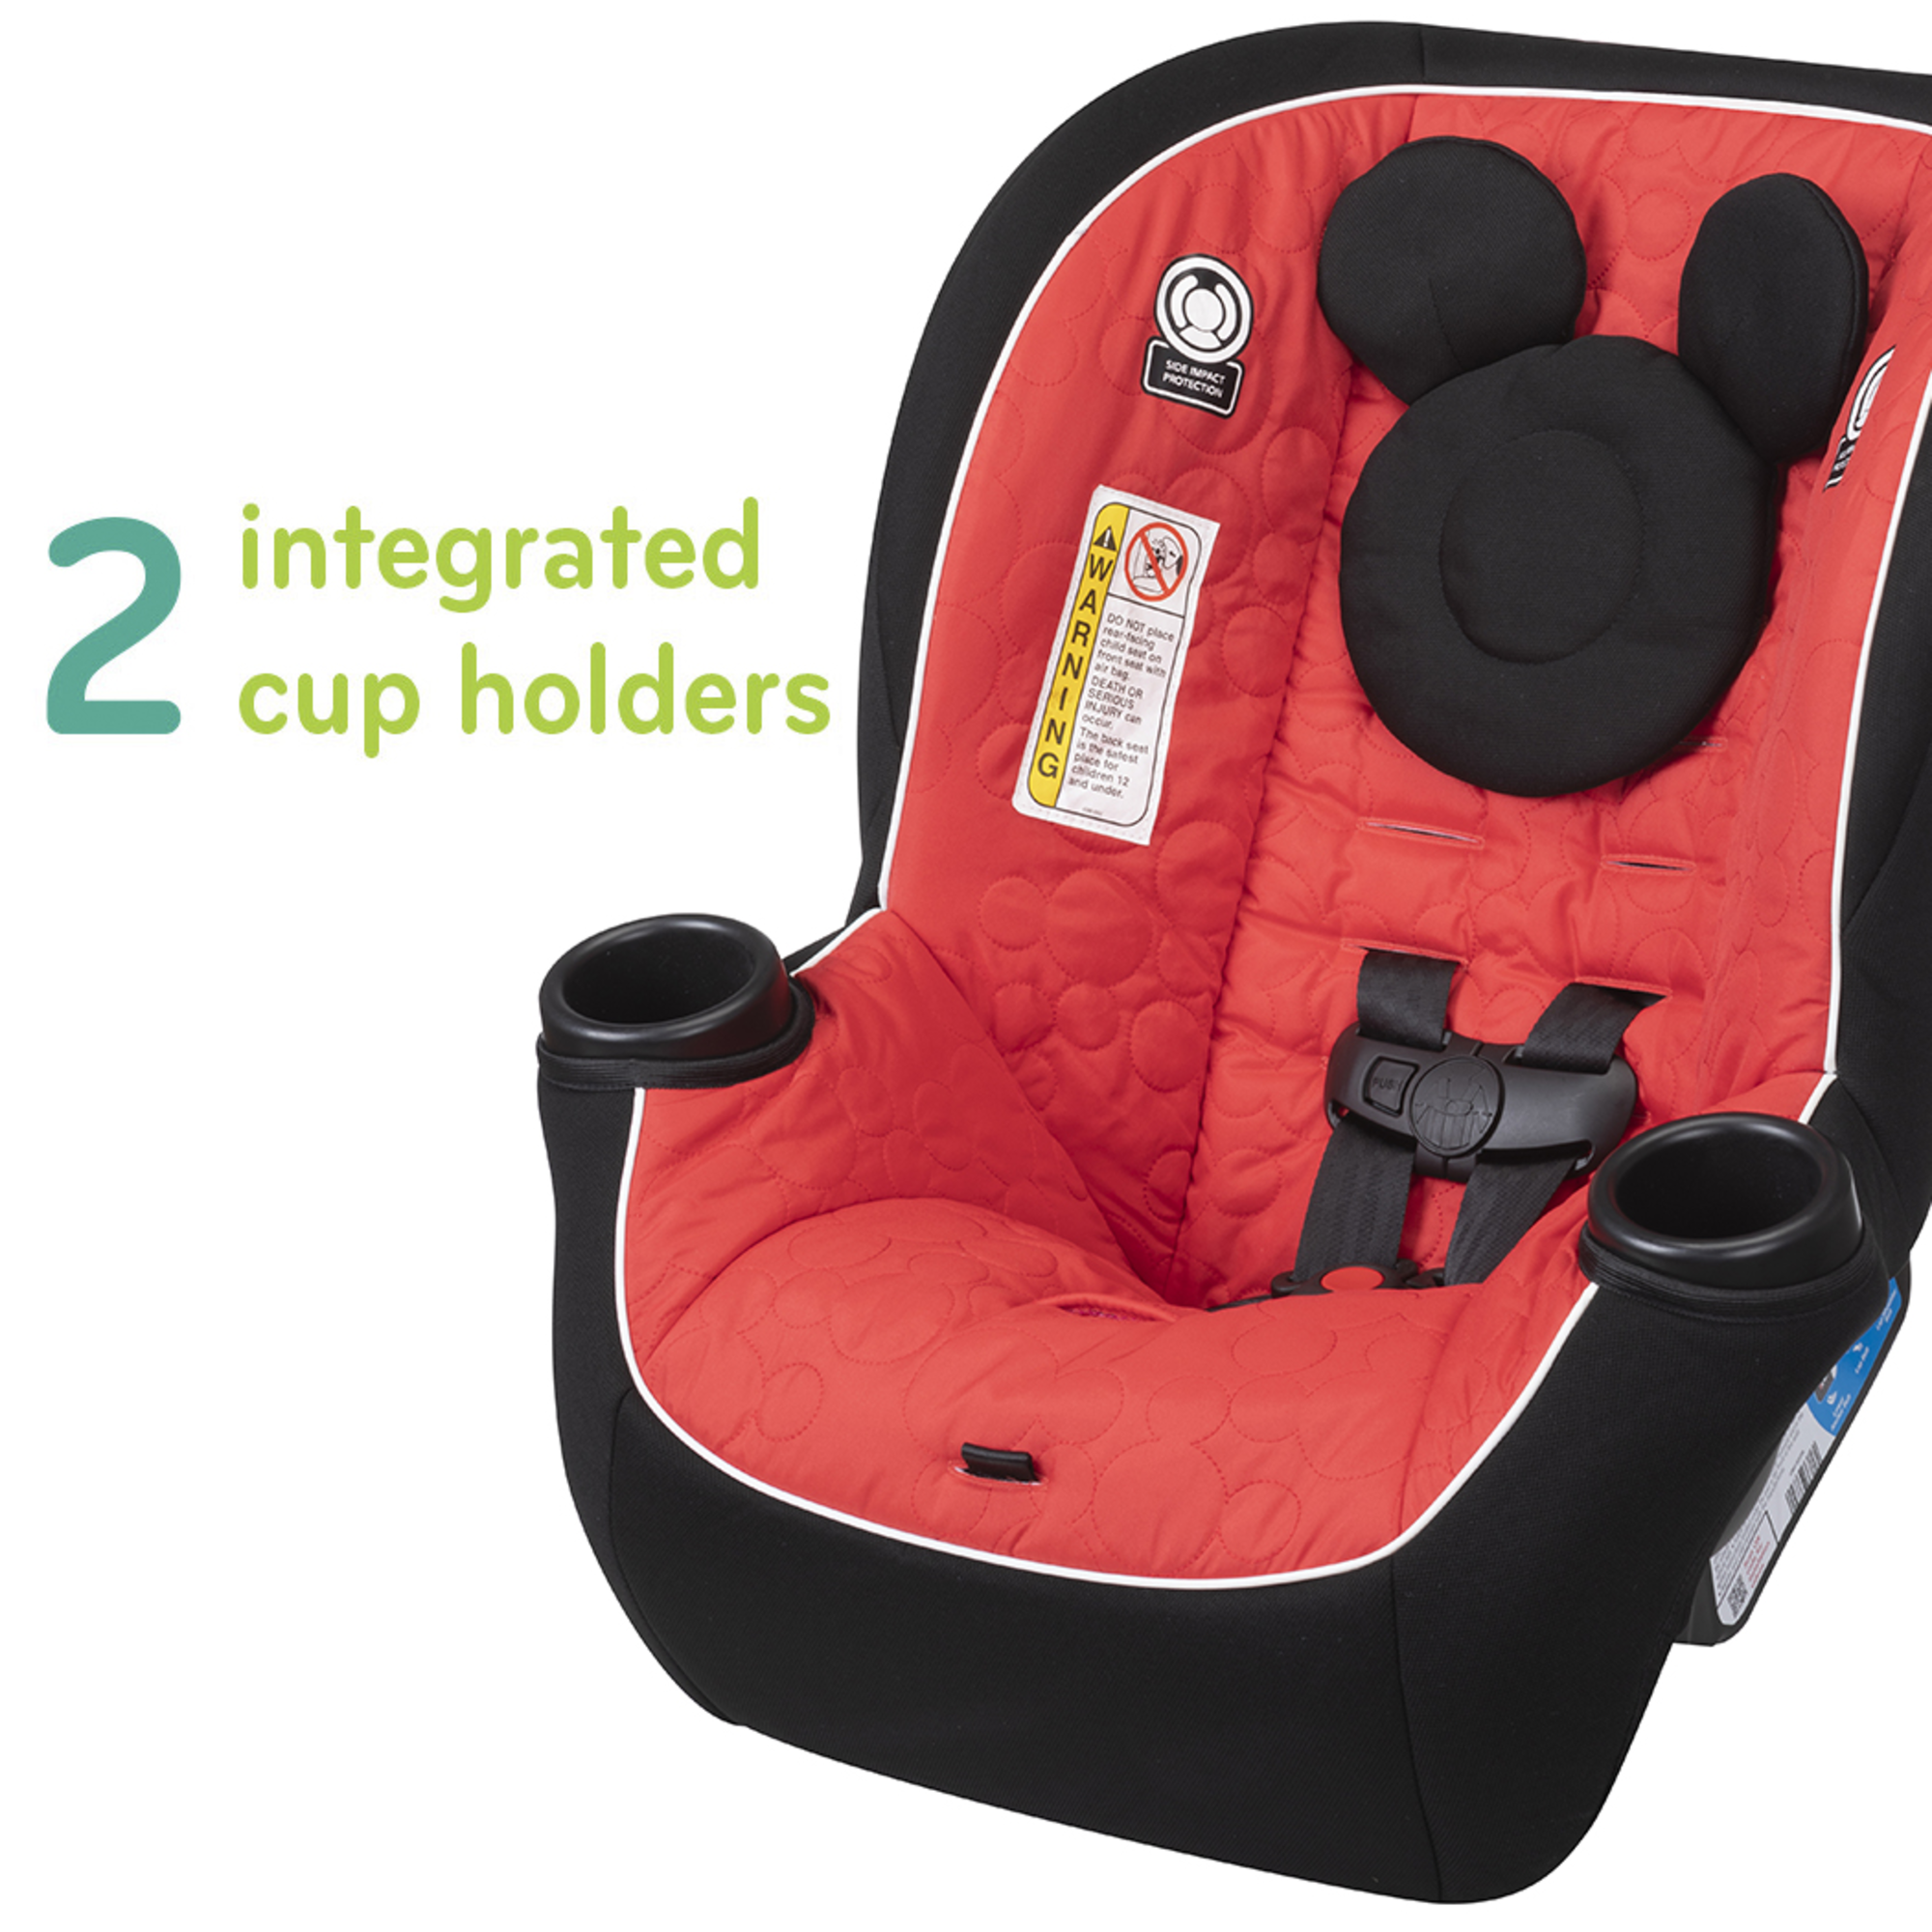 Disney Baby Onlook 2-in-1 Convertible Car Seat - Mouseketeer Mickey - 2 integrated cup holders